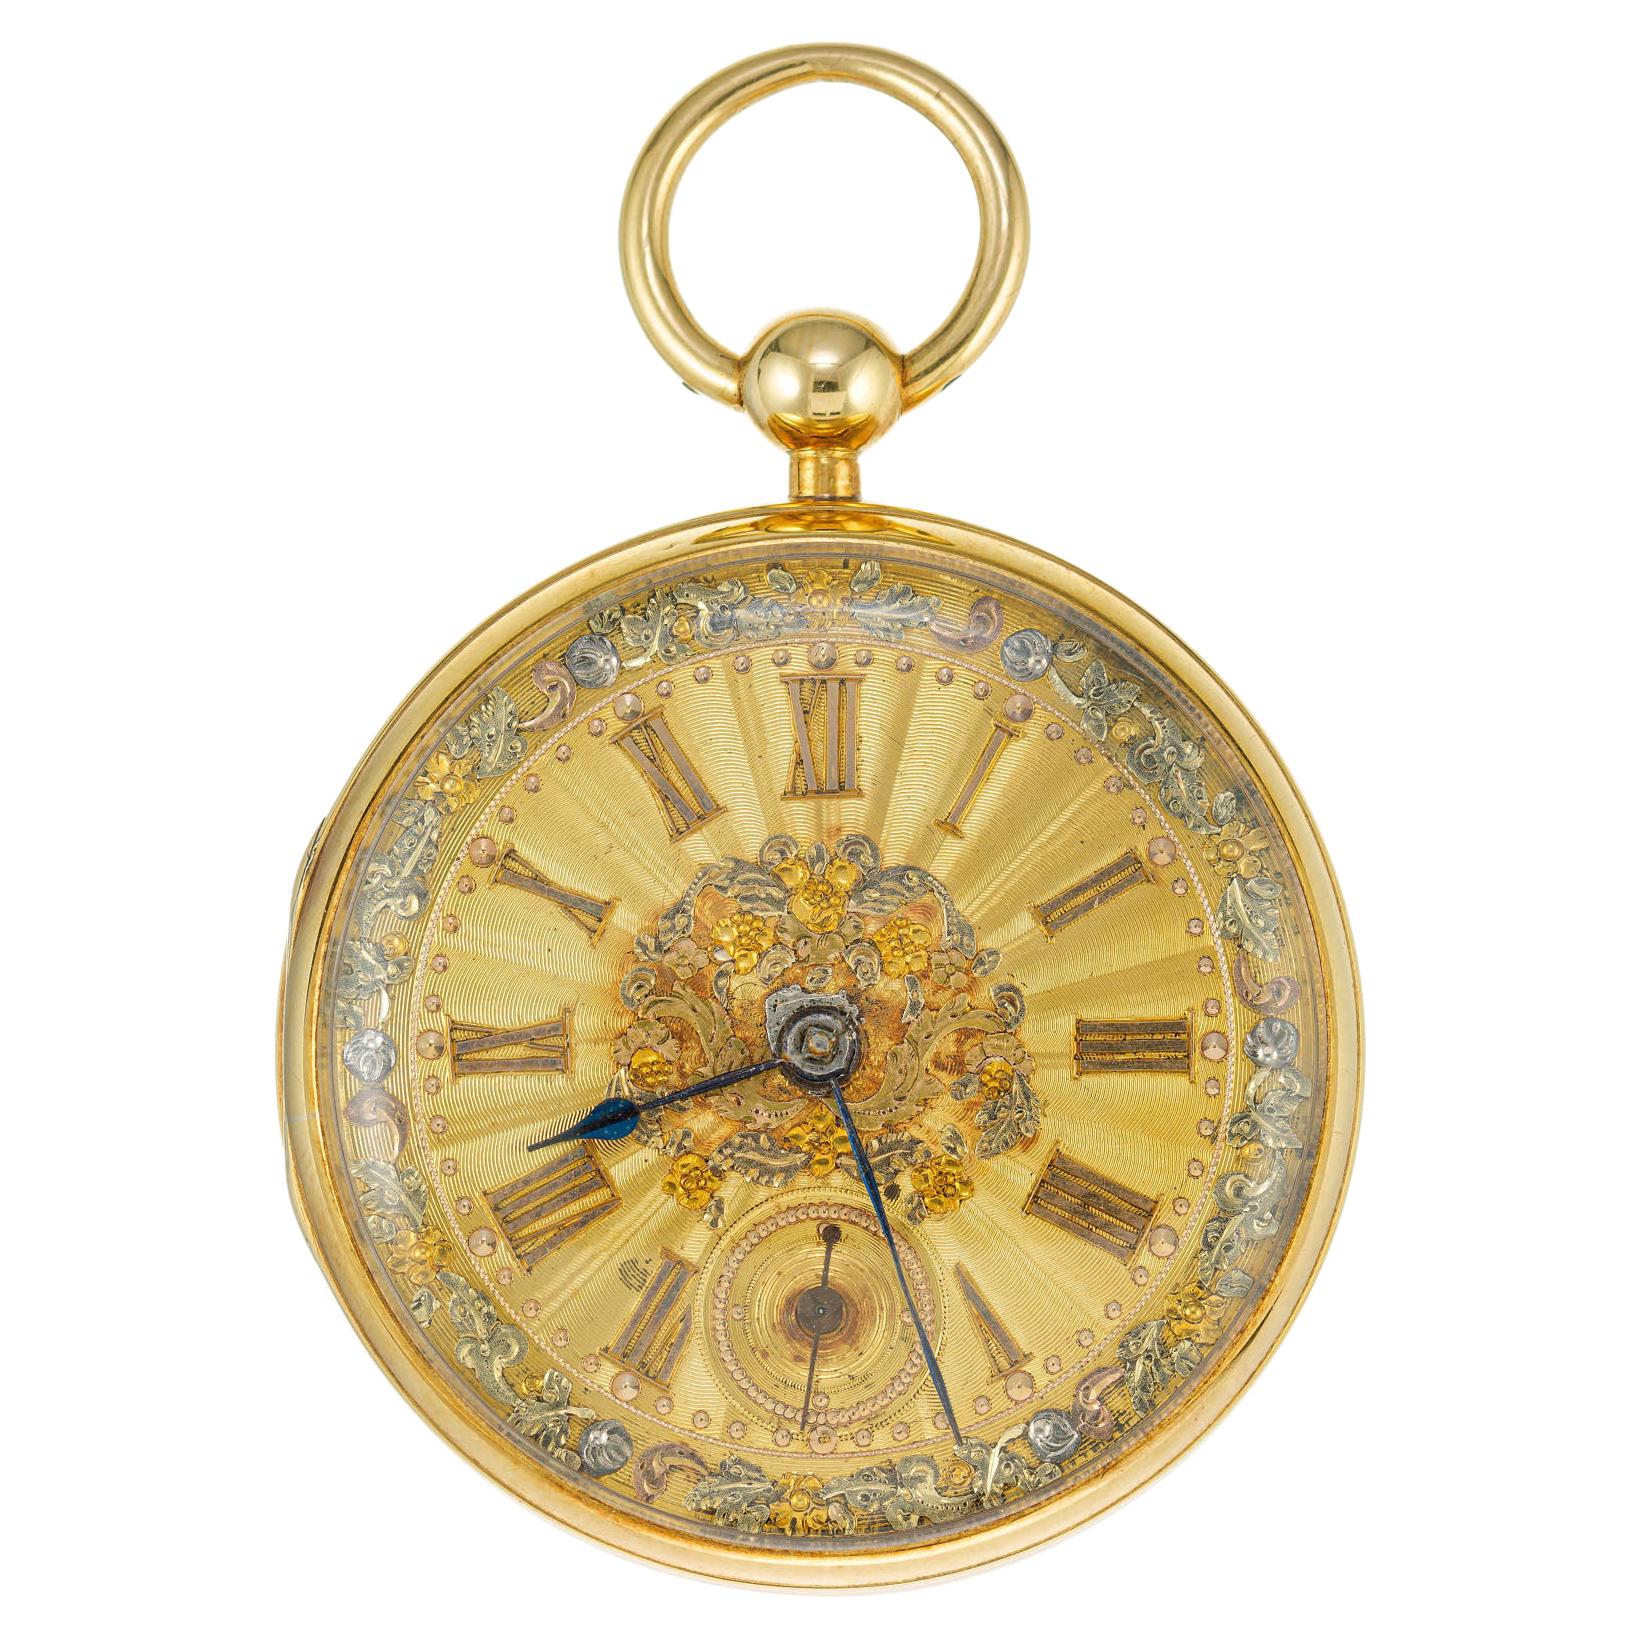 How can I tell the year of a pocket watch?